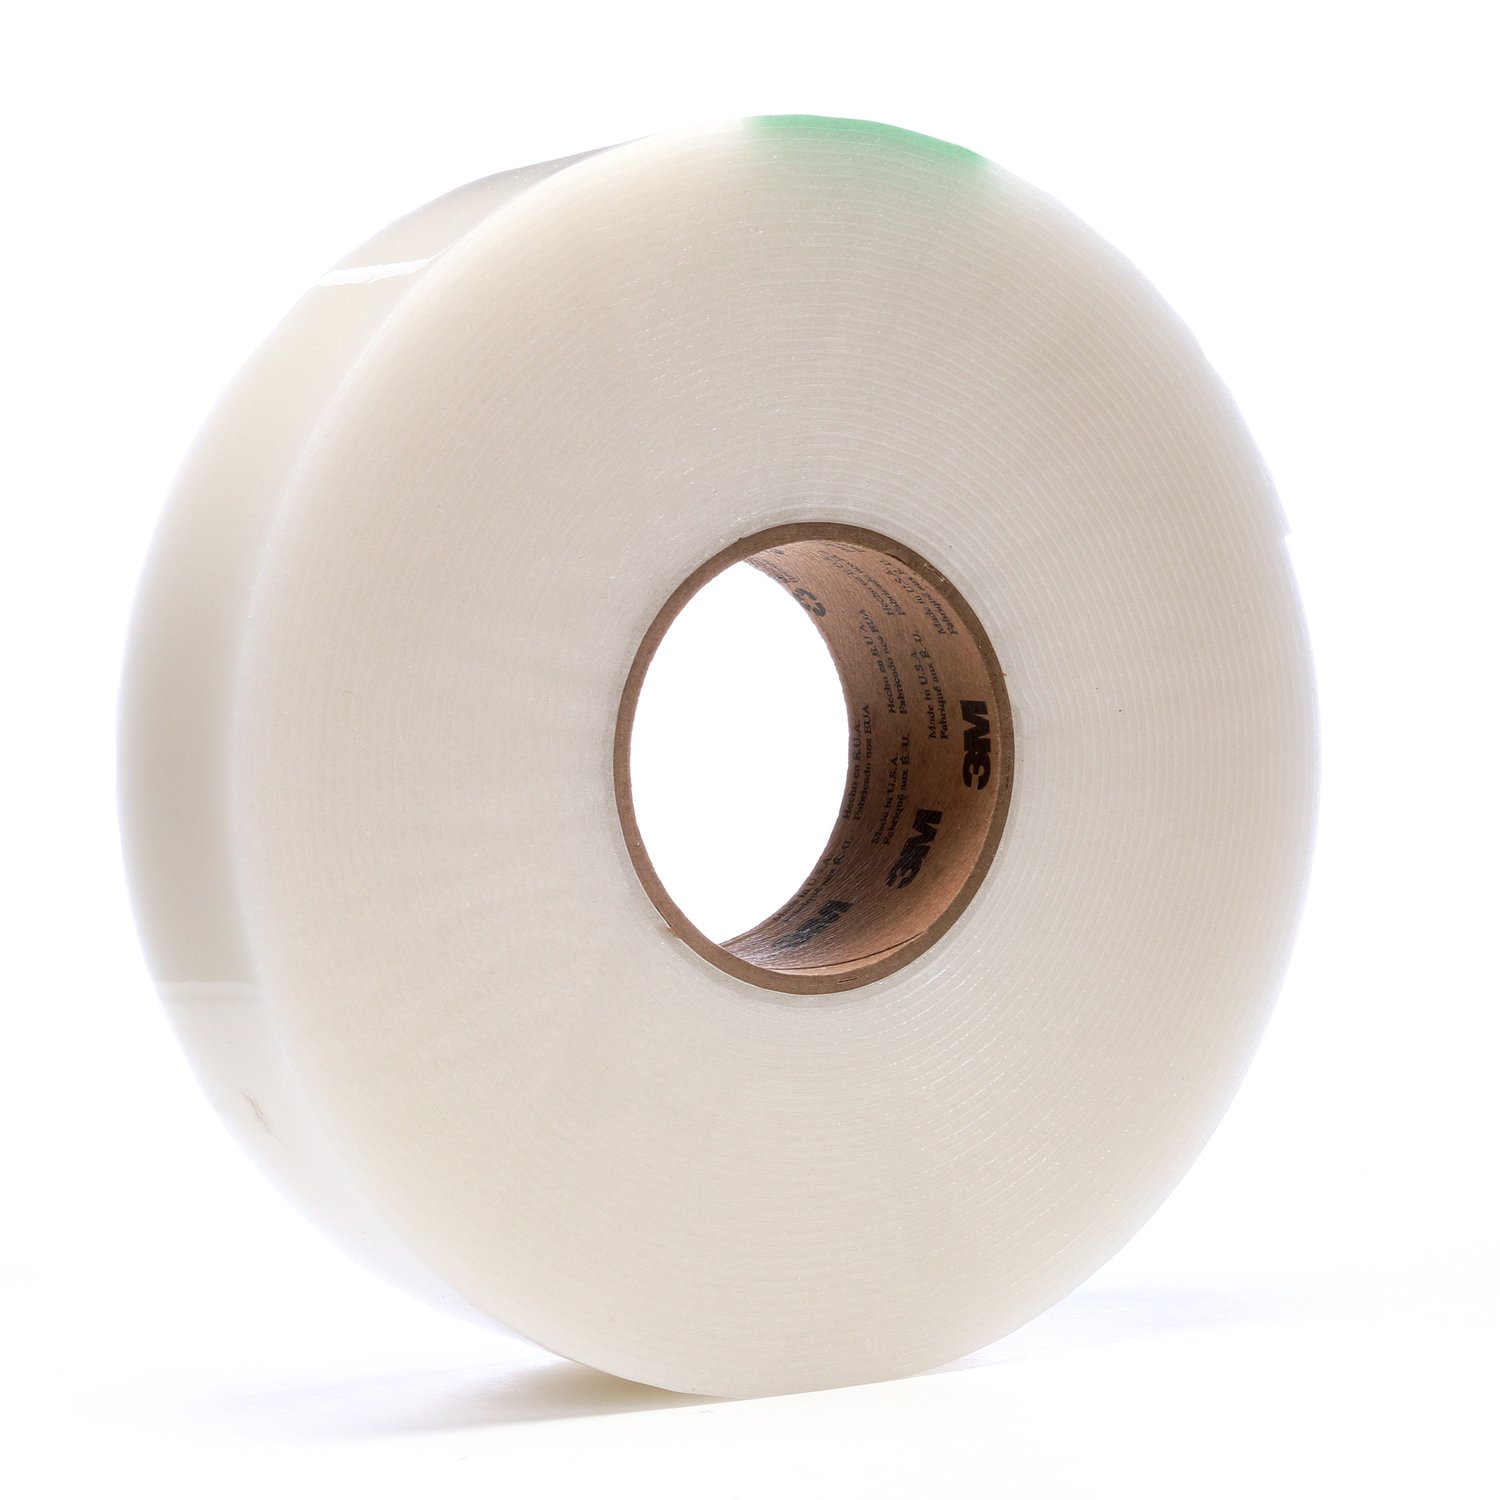 7000021302 - 3M Extreme Sealing Tape 4412N, Translucent, 2 in x 18 yd, 80 mil, 6
rolls per case